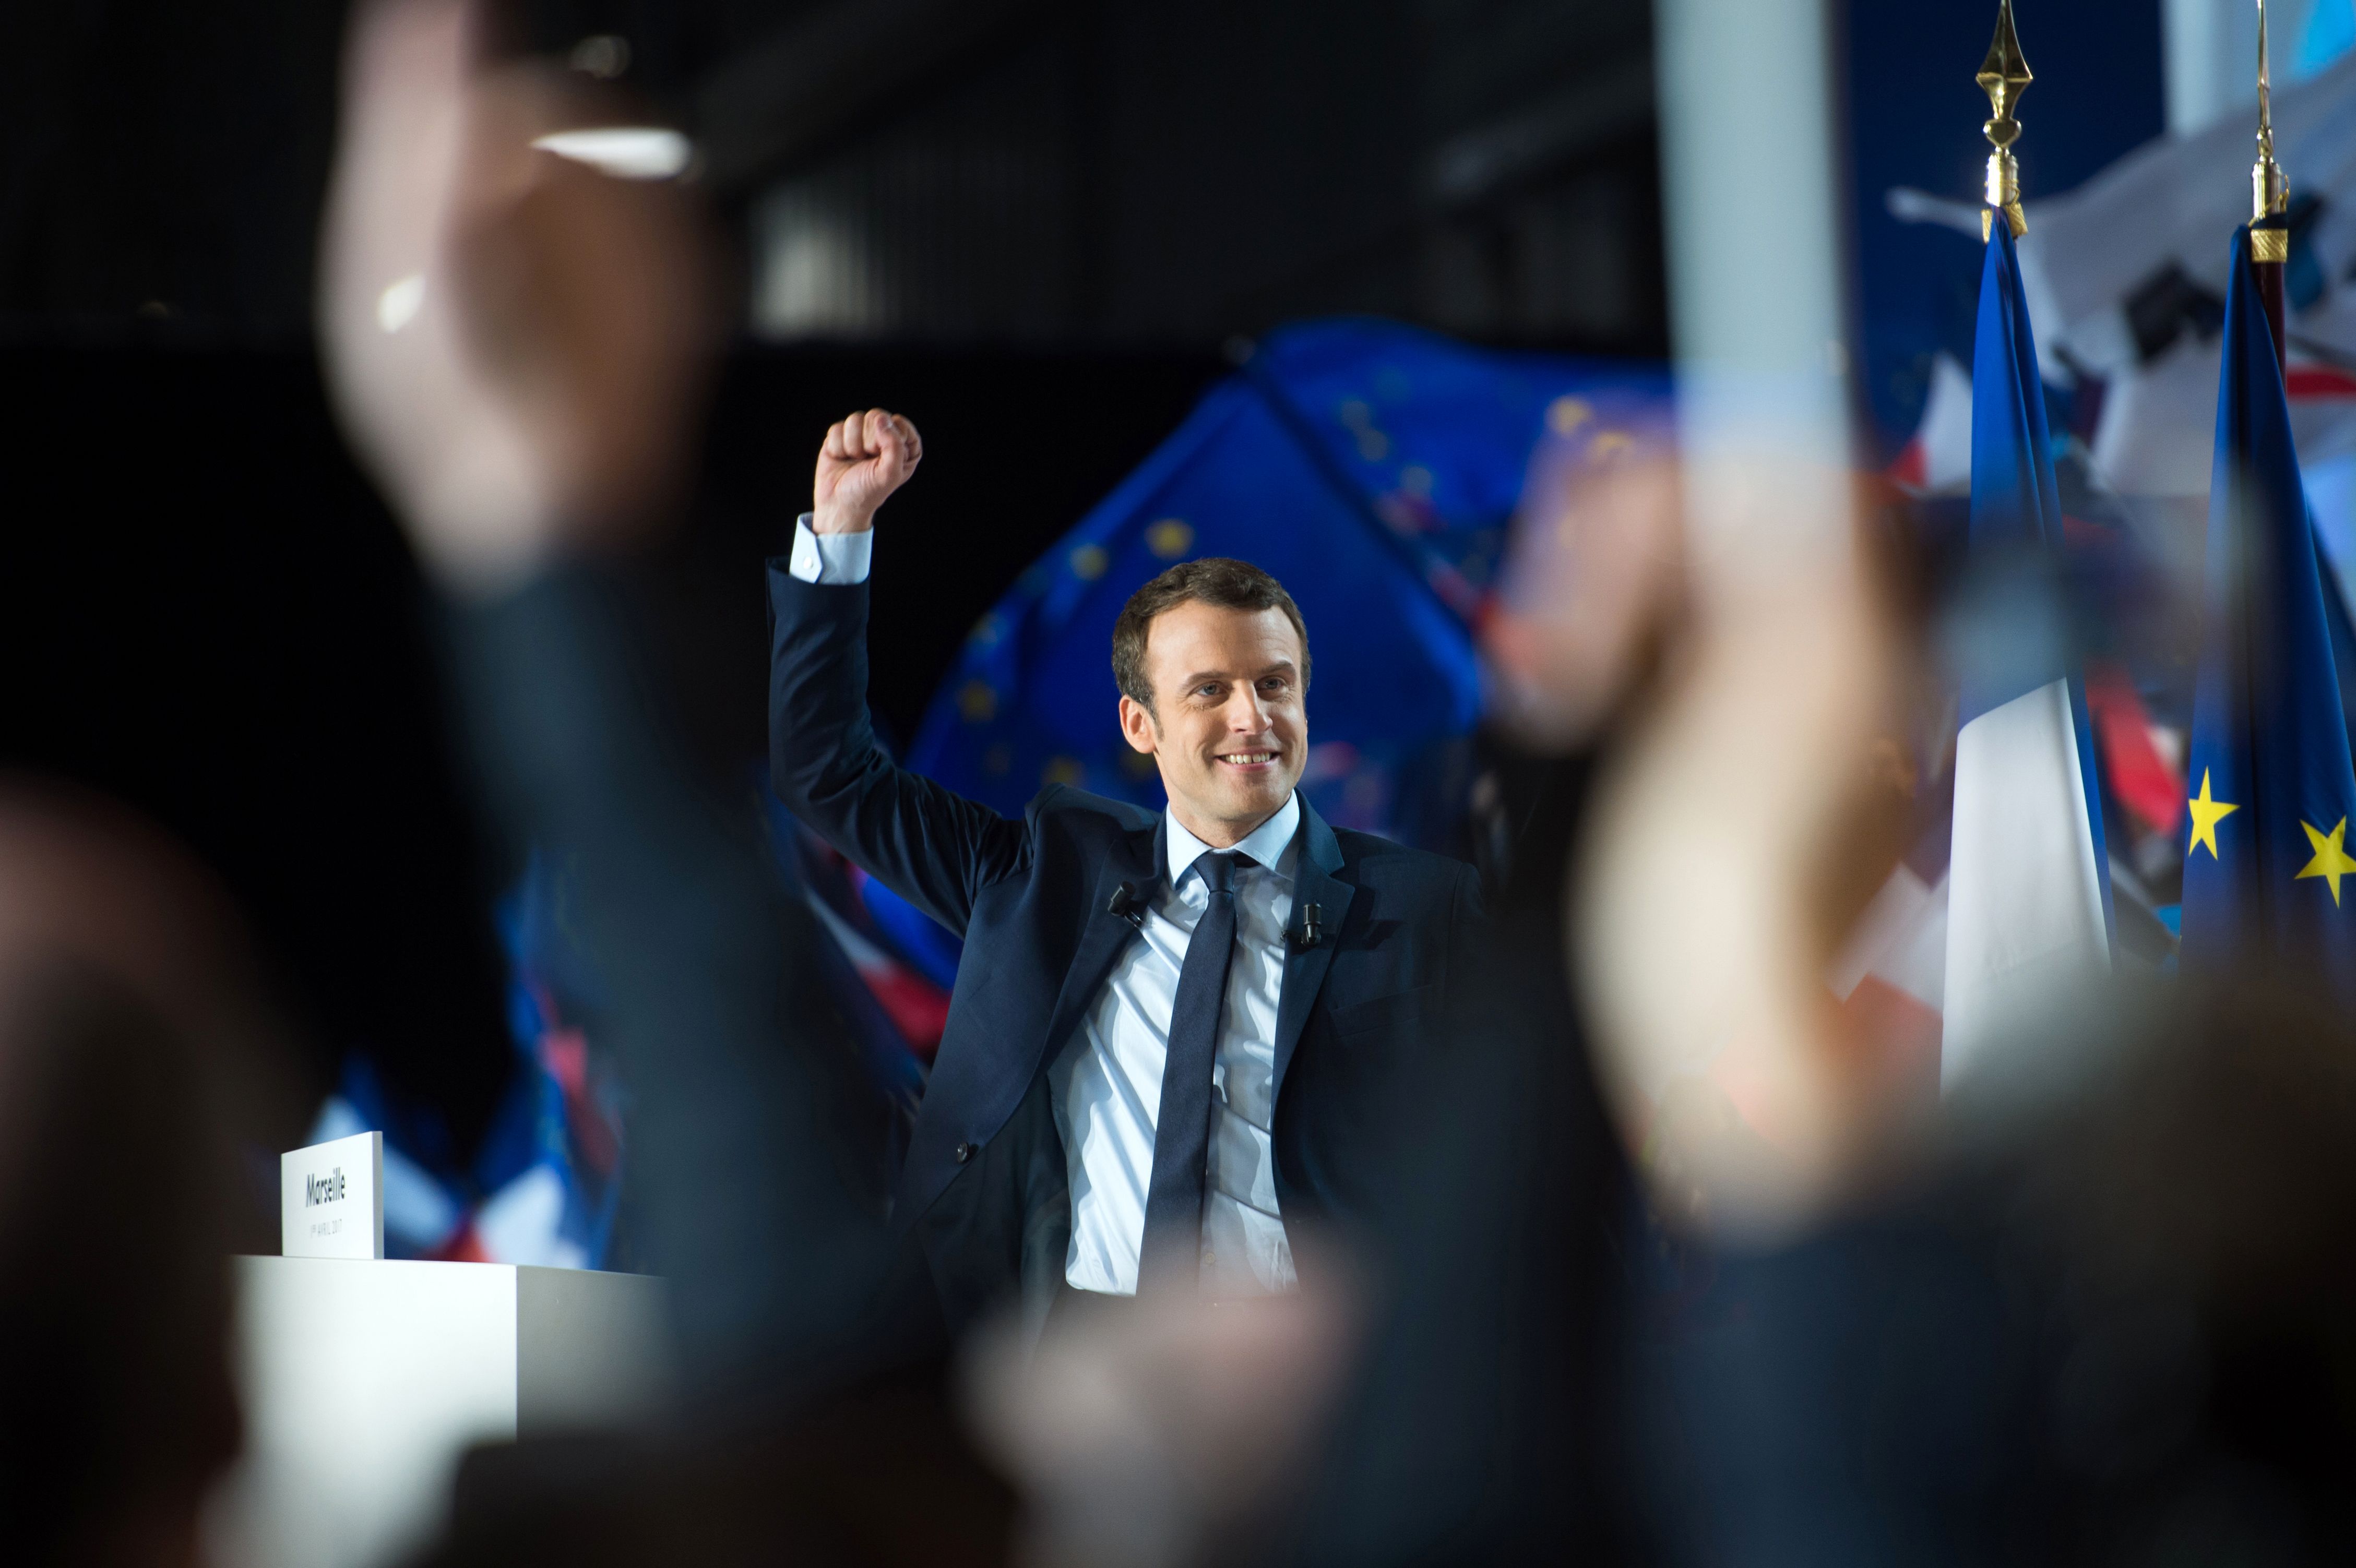 TOPSHOT - French presidential election candidate for the En Marche ! movement Emmanuel Macron raises his fist in the air during a campaign meeting in Marseille, southern France, on April 1, 2017. / AFP PHOTO / BERTRAND LANGLOIS / TT / kod 444